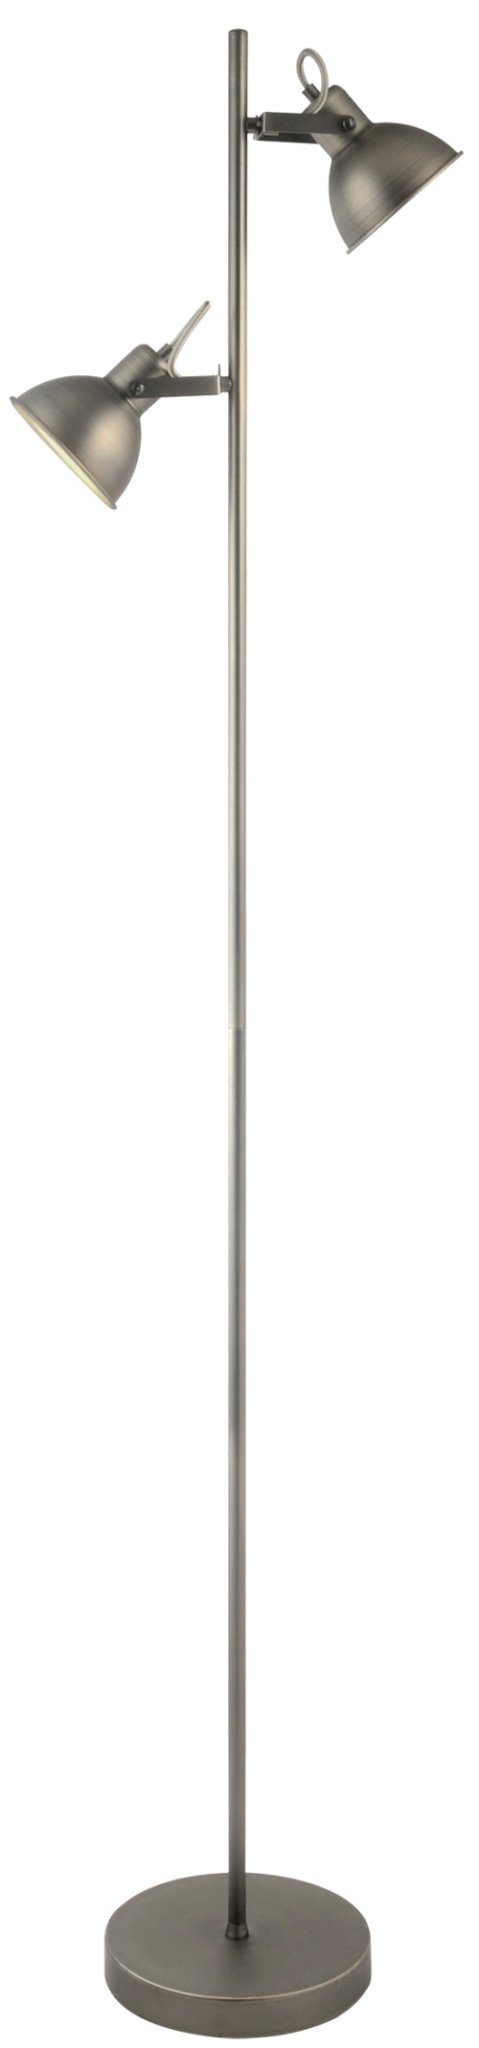 Antique Matt Silver 2 Light Floor Lamp On/Off Foot Switch -2x GU10 (Not included) - Lifespace